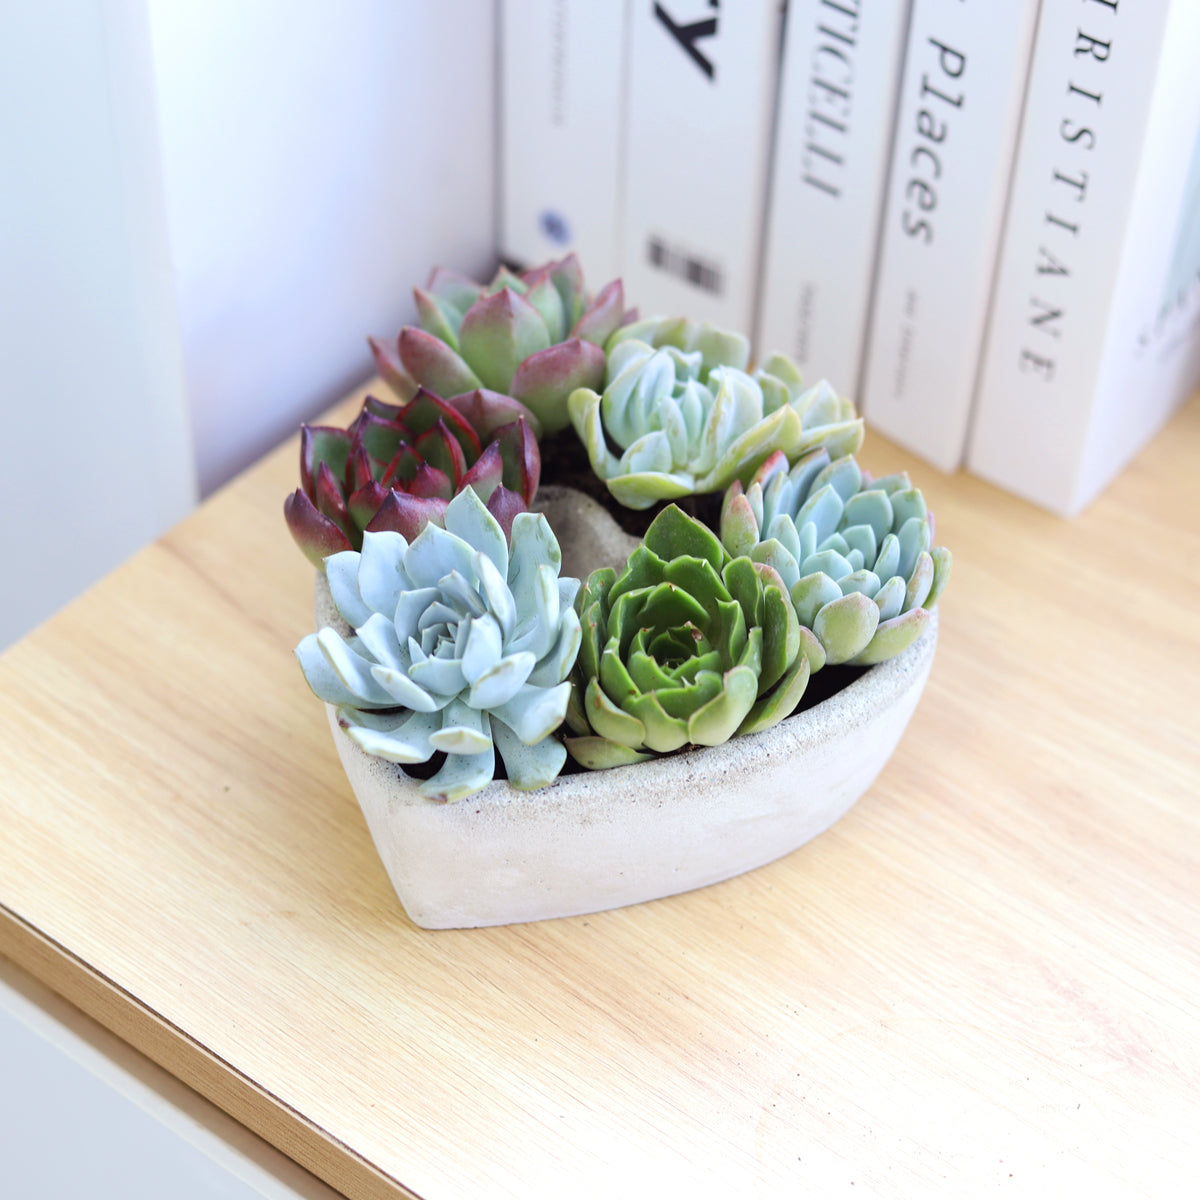 7 inch Succulent Heart Arrangement for sale, Succulent Gift Ideas, Live Succulent Arrangement for Home Decor Ideas, Mother's Day Succulent Arrangement, Send Potted Plants to Mom For Mother's Day, Potted Succulent Arrangement for Sale